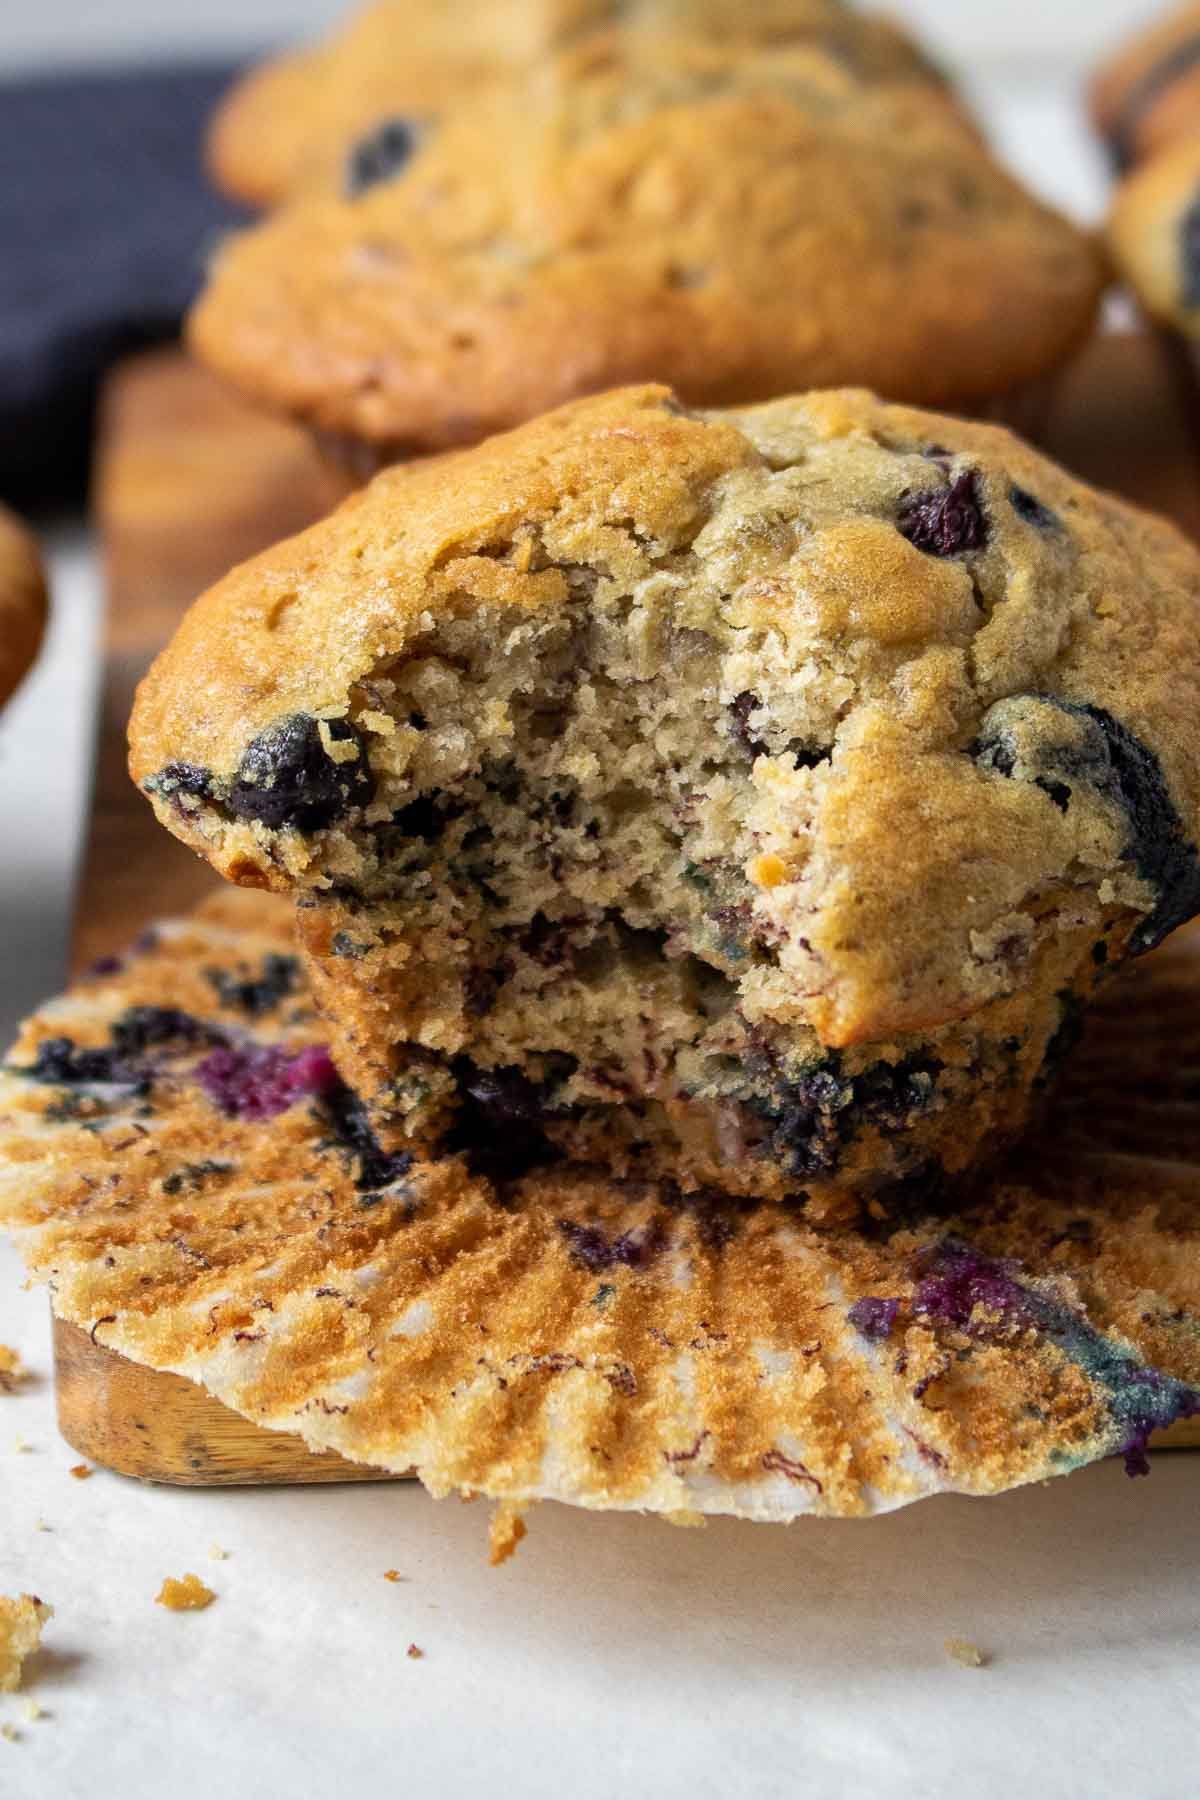 Banana blueberry muffin on a cutting board with a bite eaten